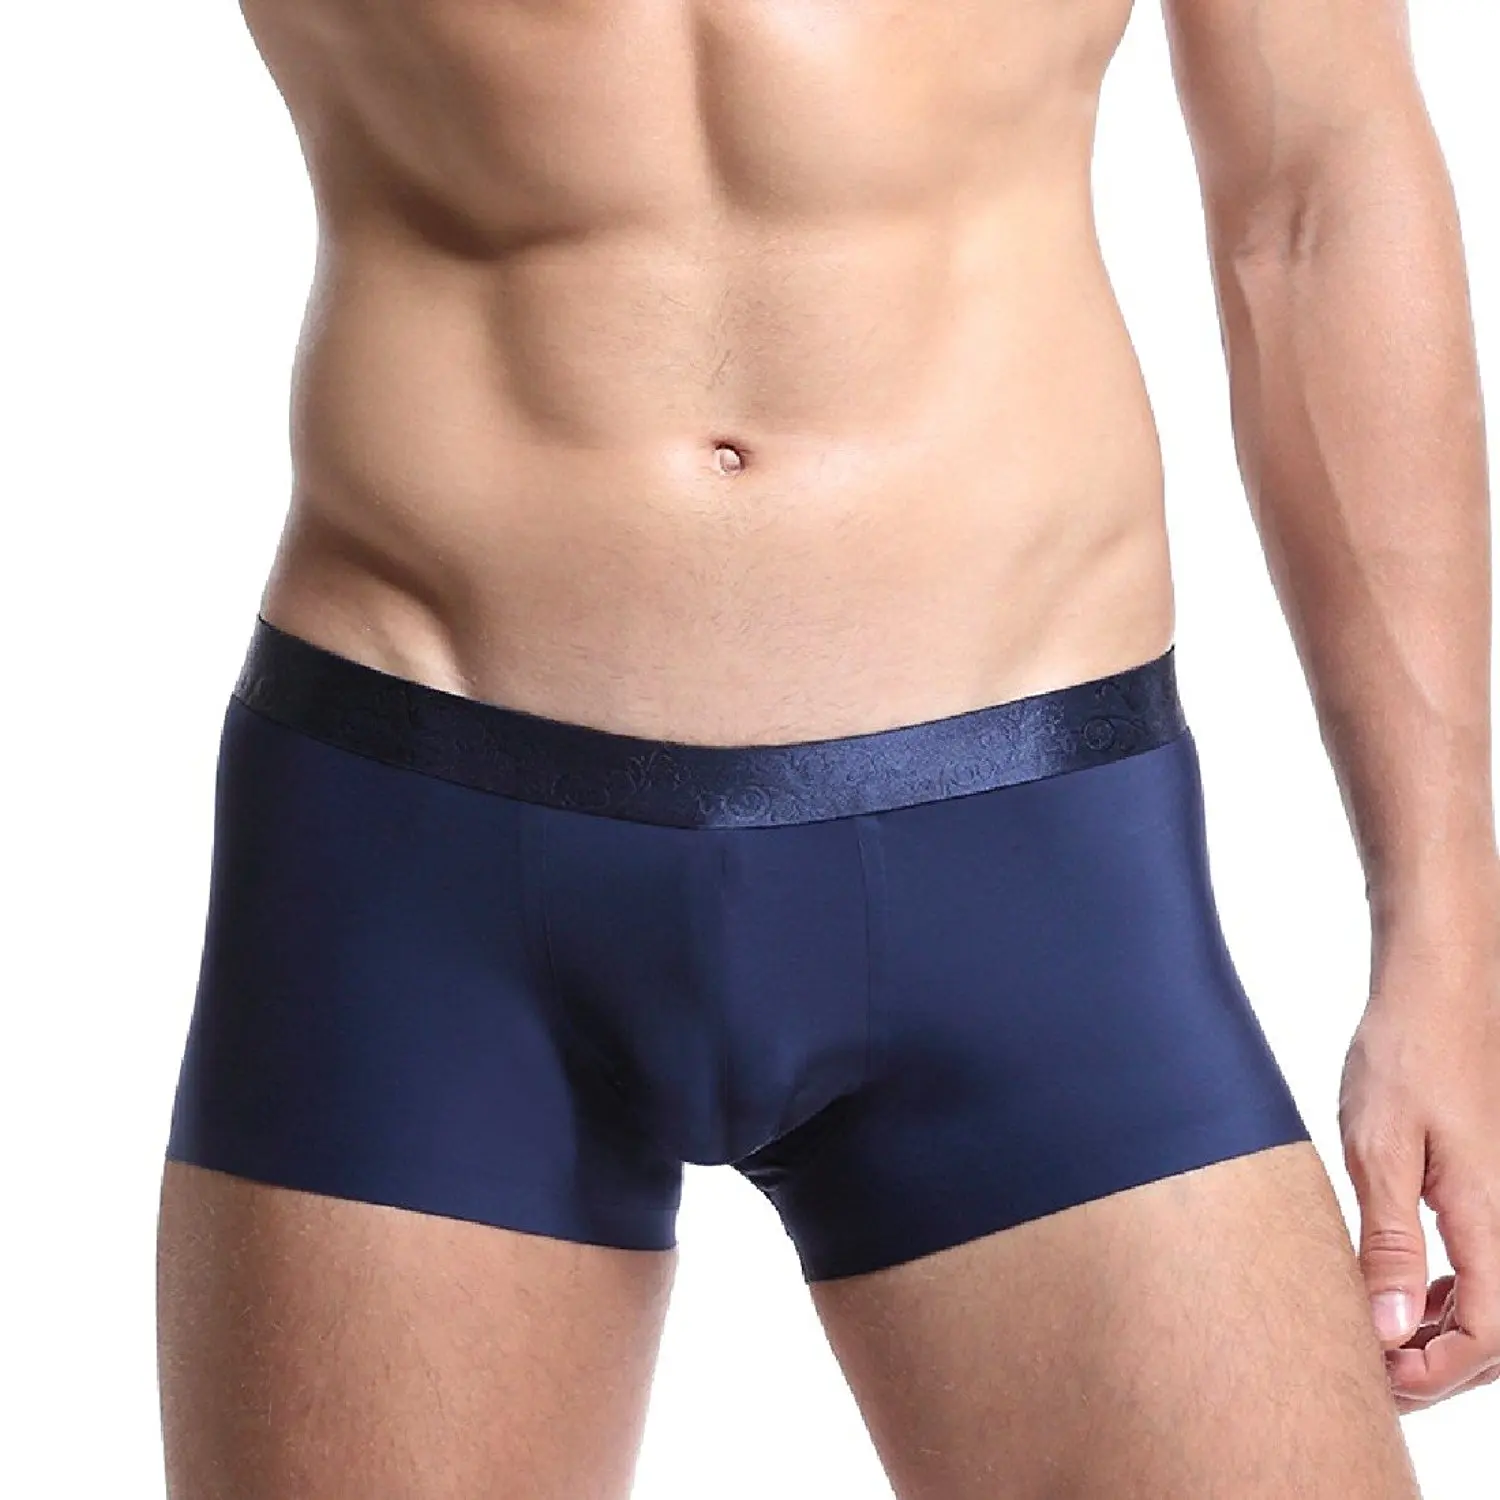 Cheap Sheer Boxer Find Sheer Boxer Deals On Line At 